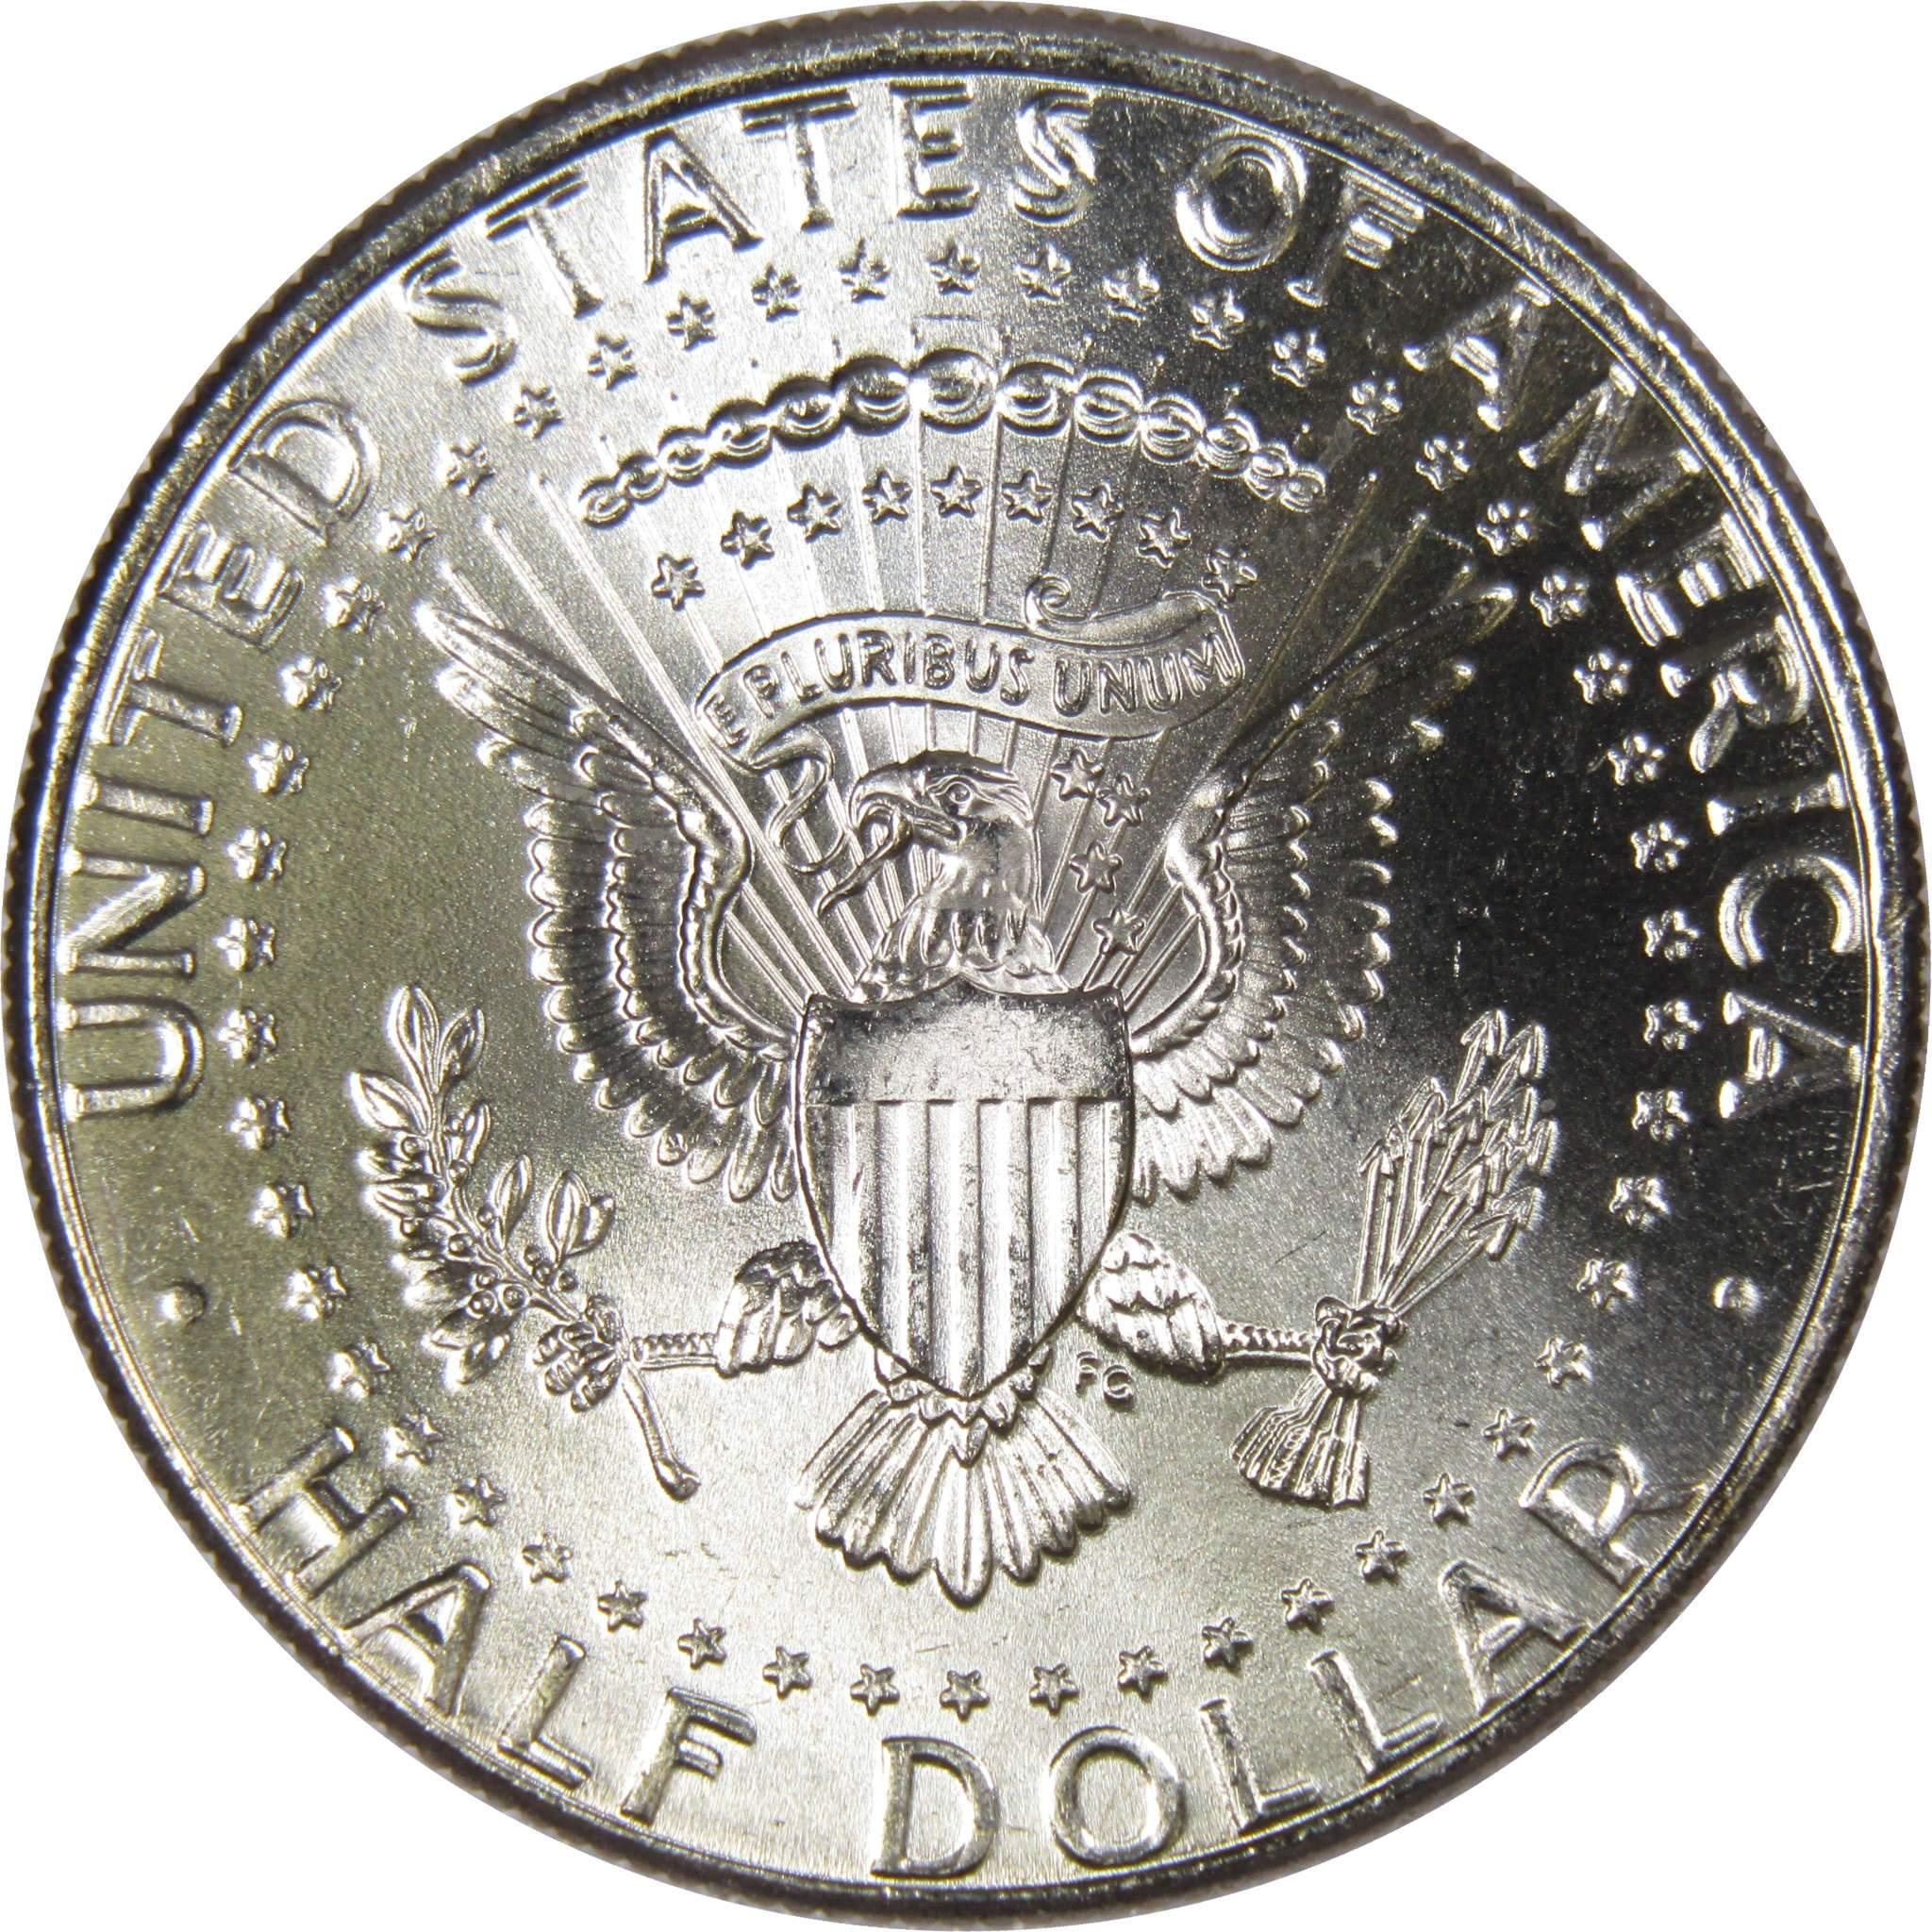 2013 P Kennedy Half Dollar BU Uncirculated Mint State 50c US Coin Collectible